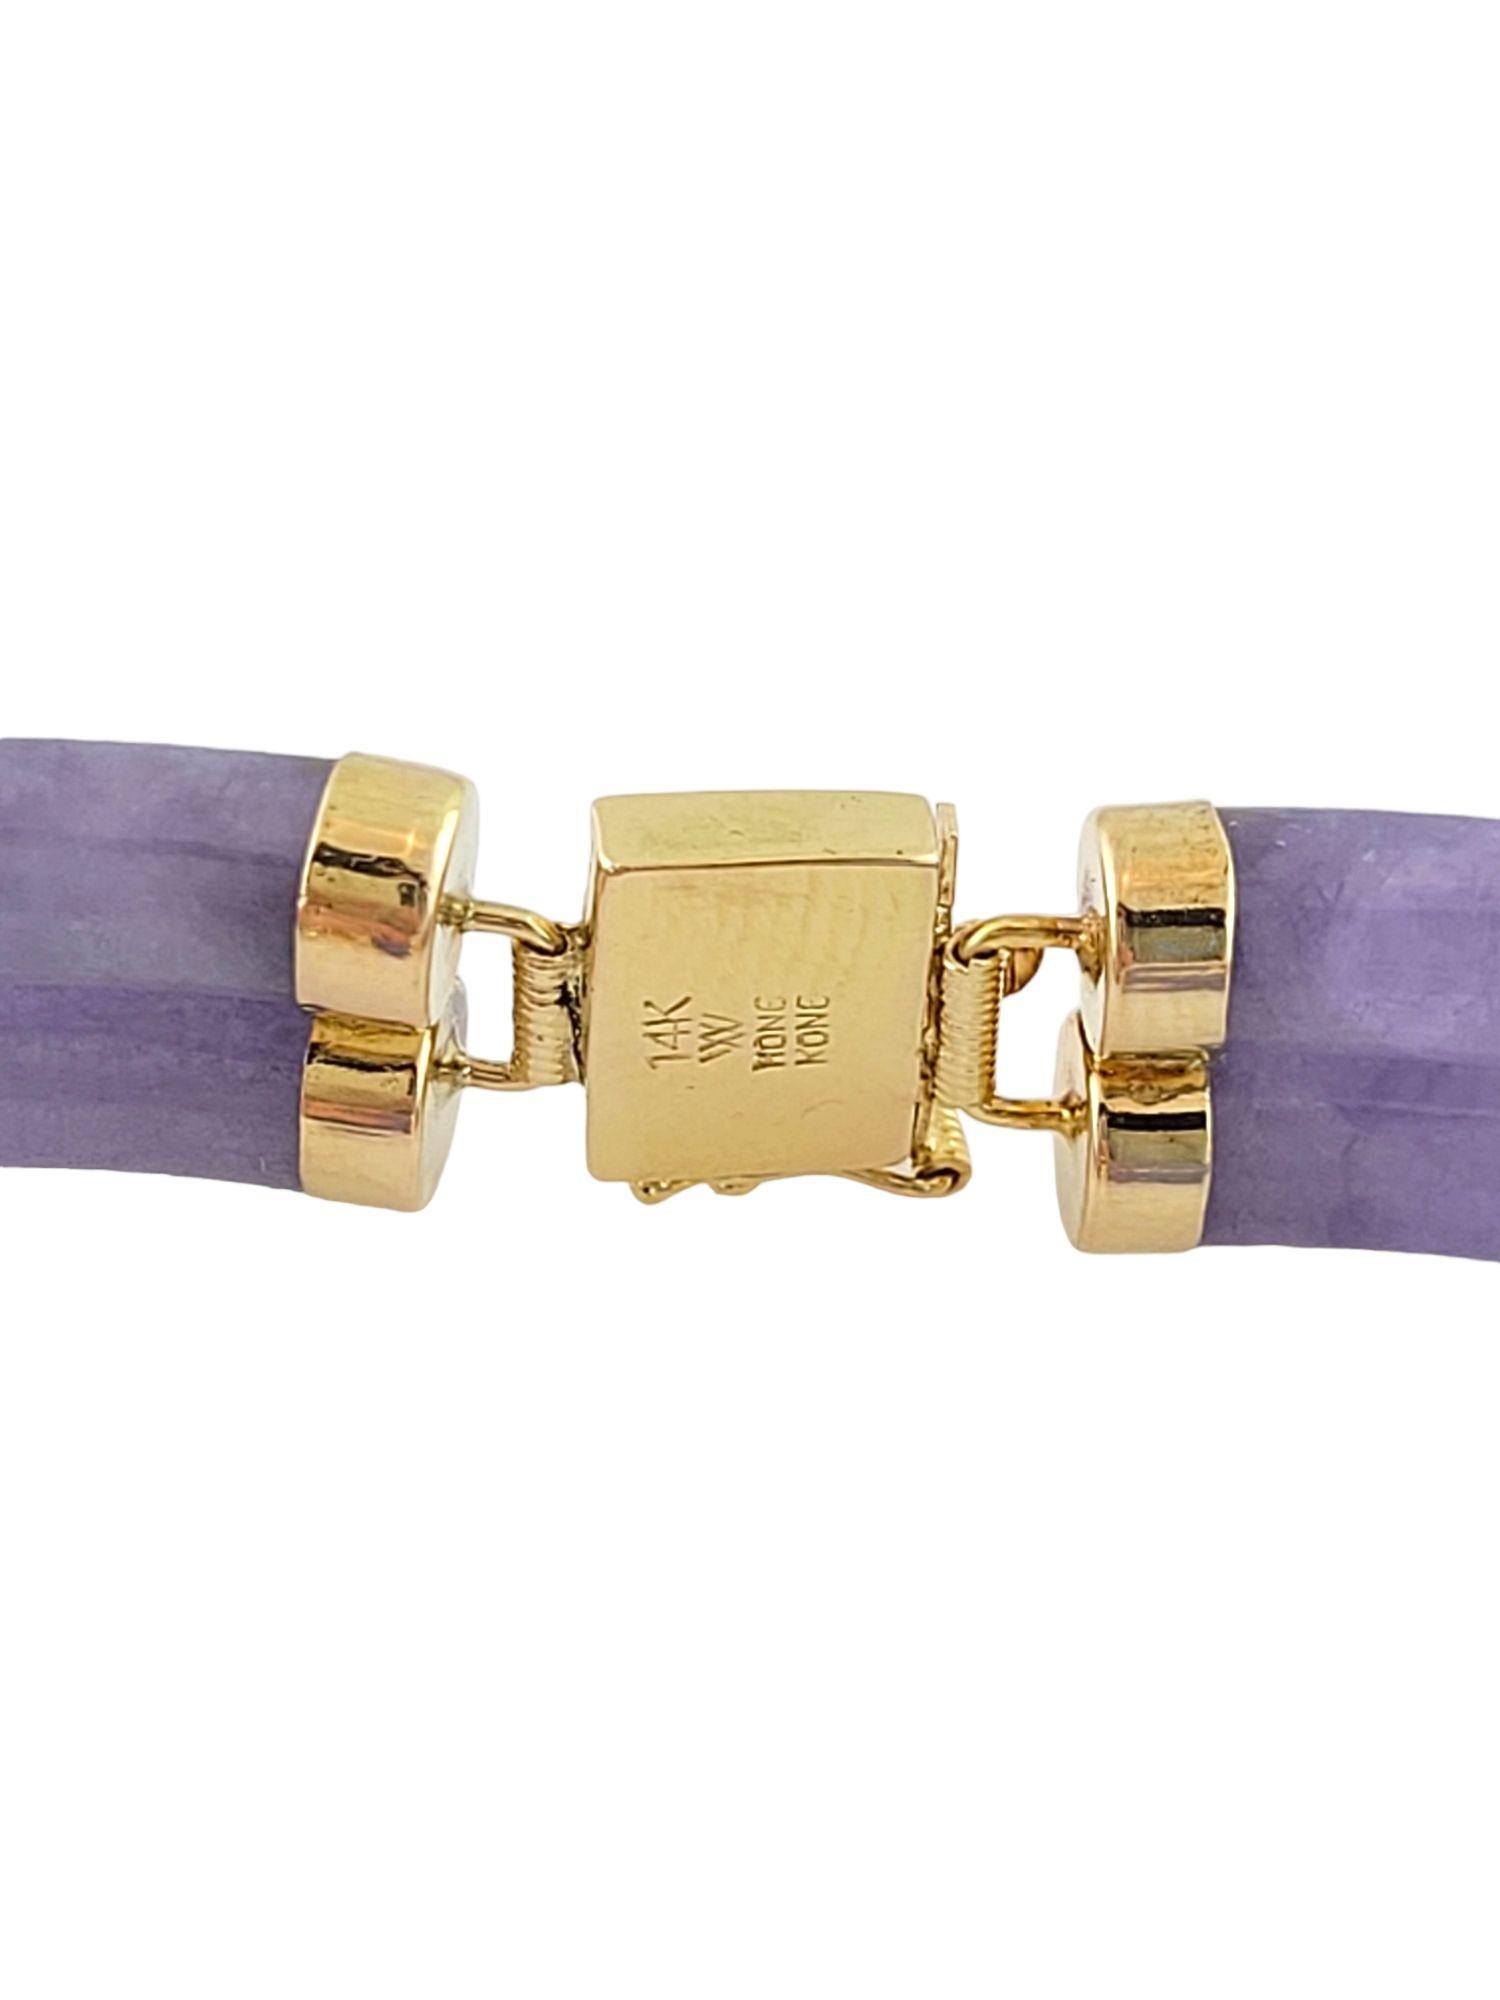 Vintage 14K Yellow Gold Purple Jade Bracelet

This gorgeous bracelet uses 14K yellow gold to chain together beautiful purple jade stones!

Size: 7